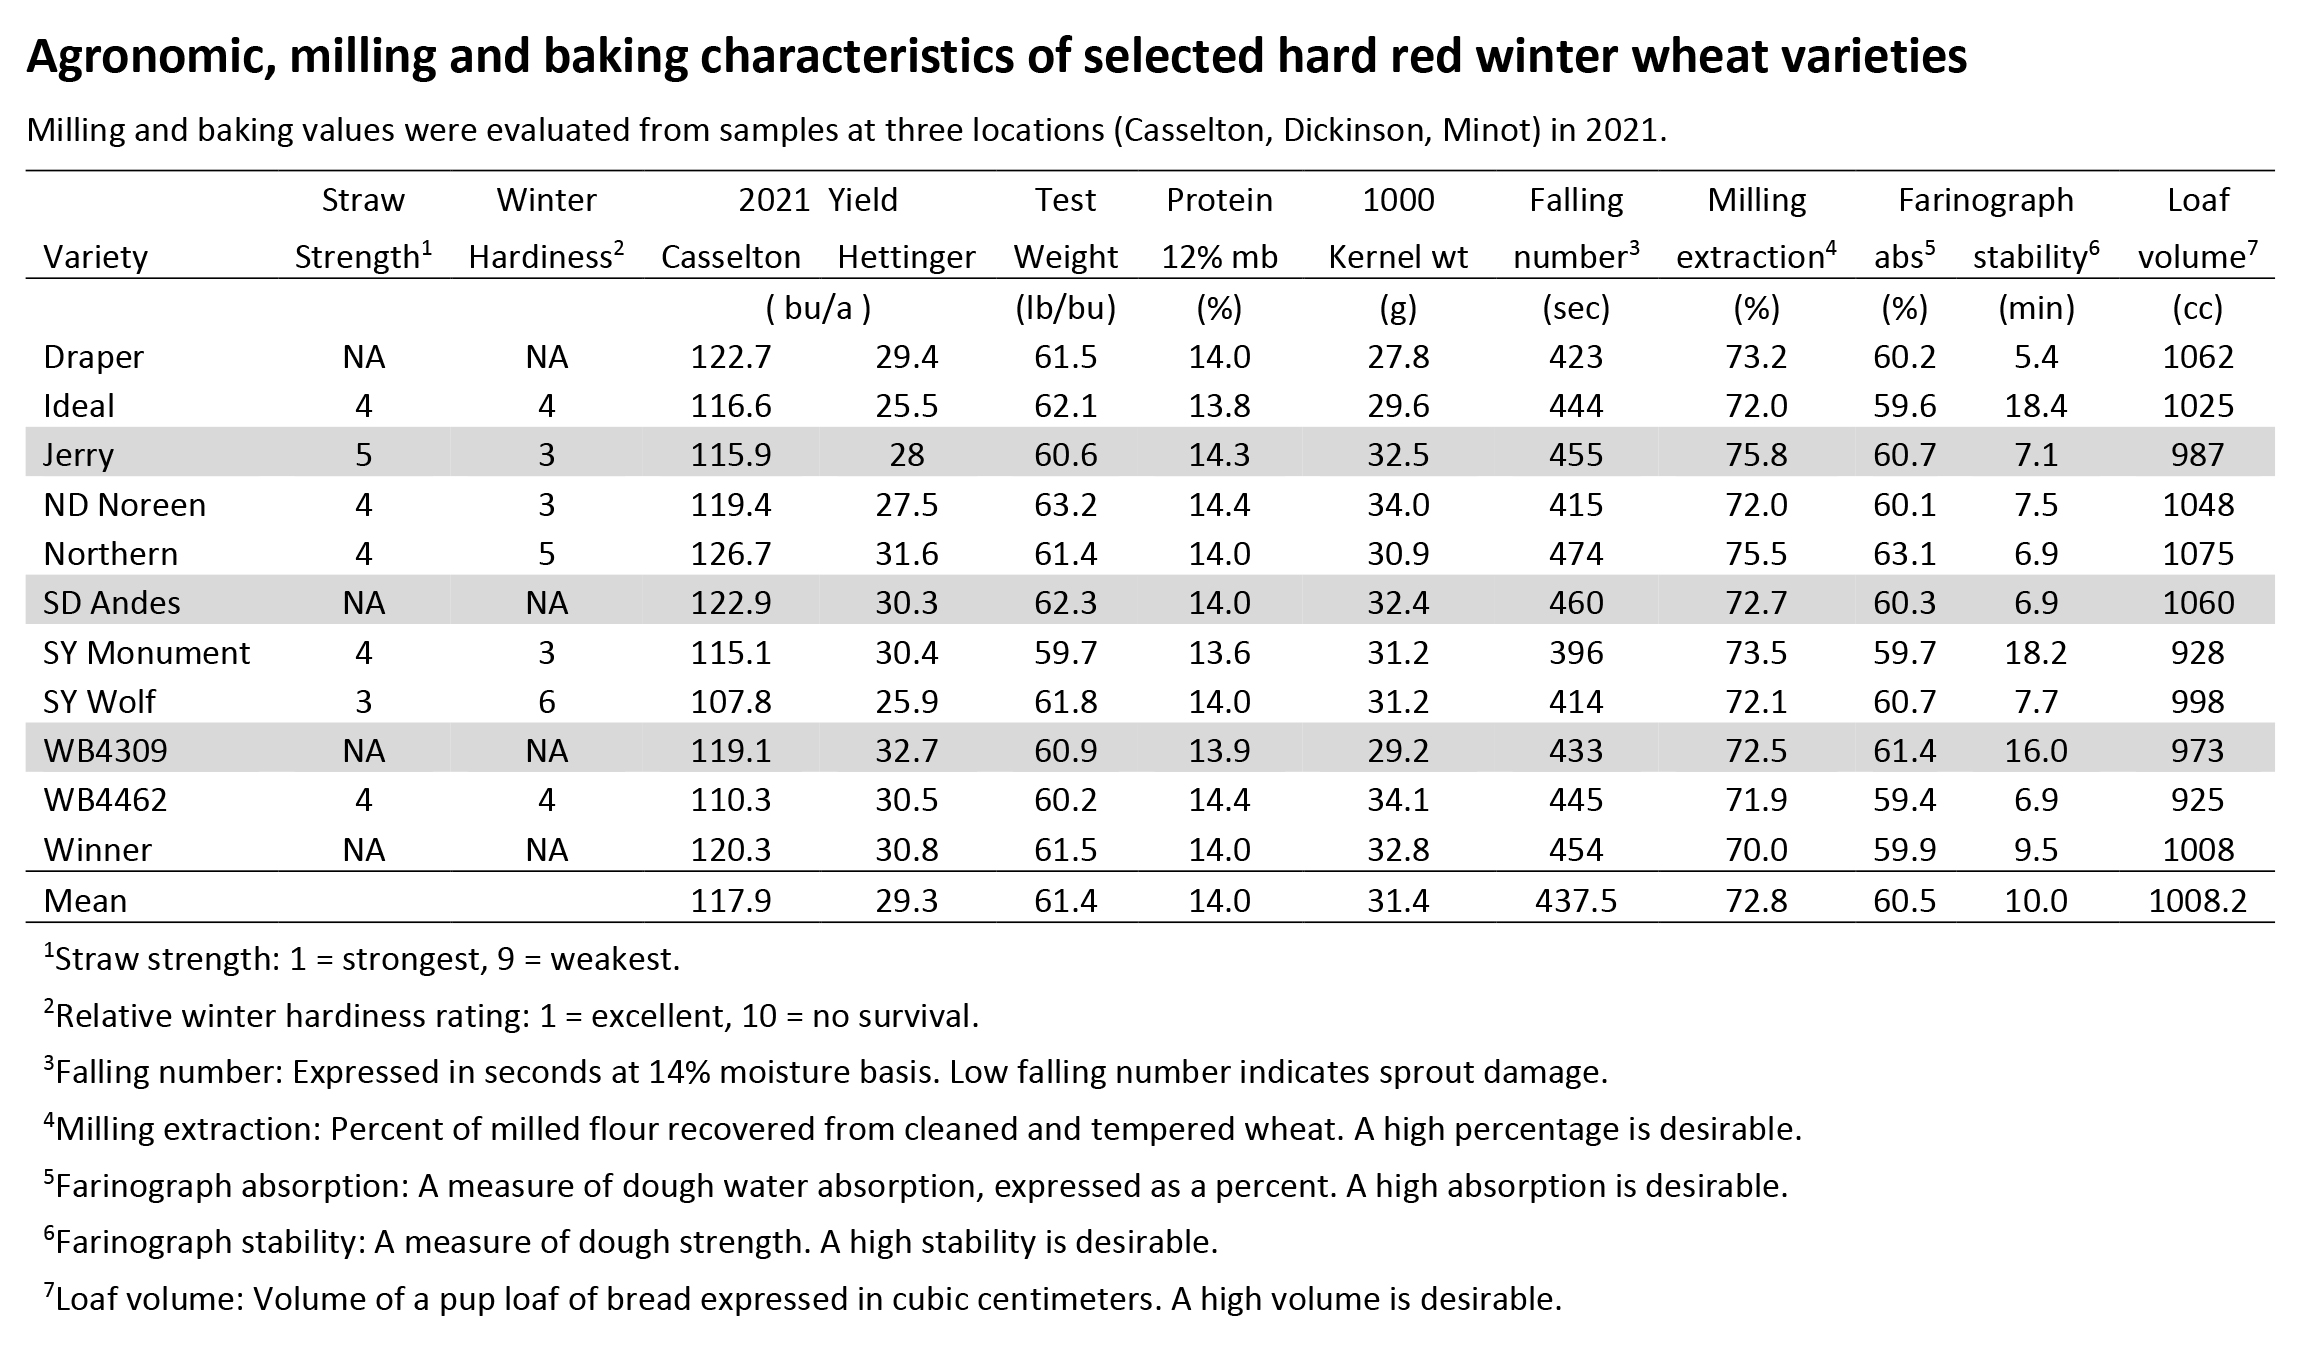 Agronomic, milling and baking characteristics of selected hard red winter wheat varieties. (NDSU photo)